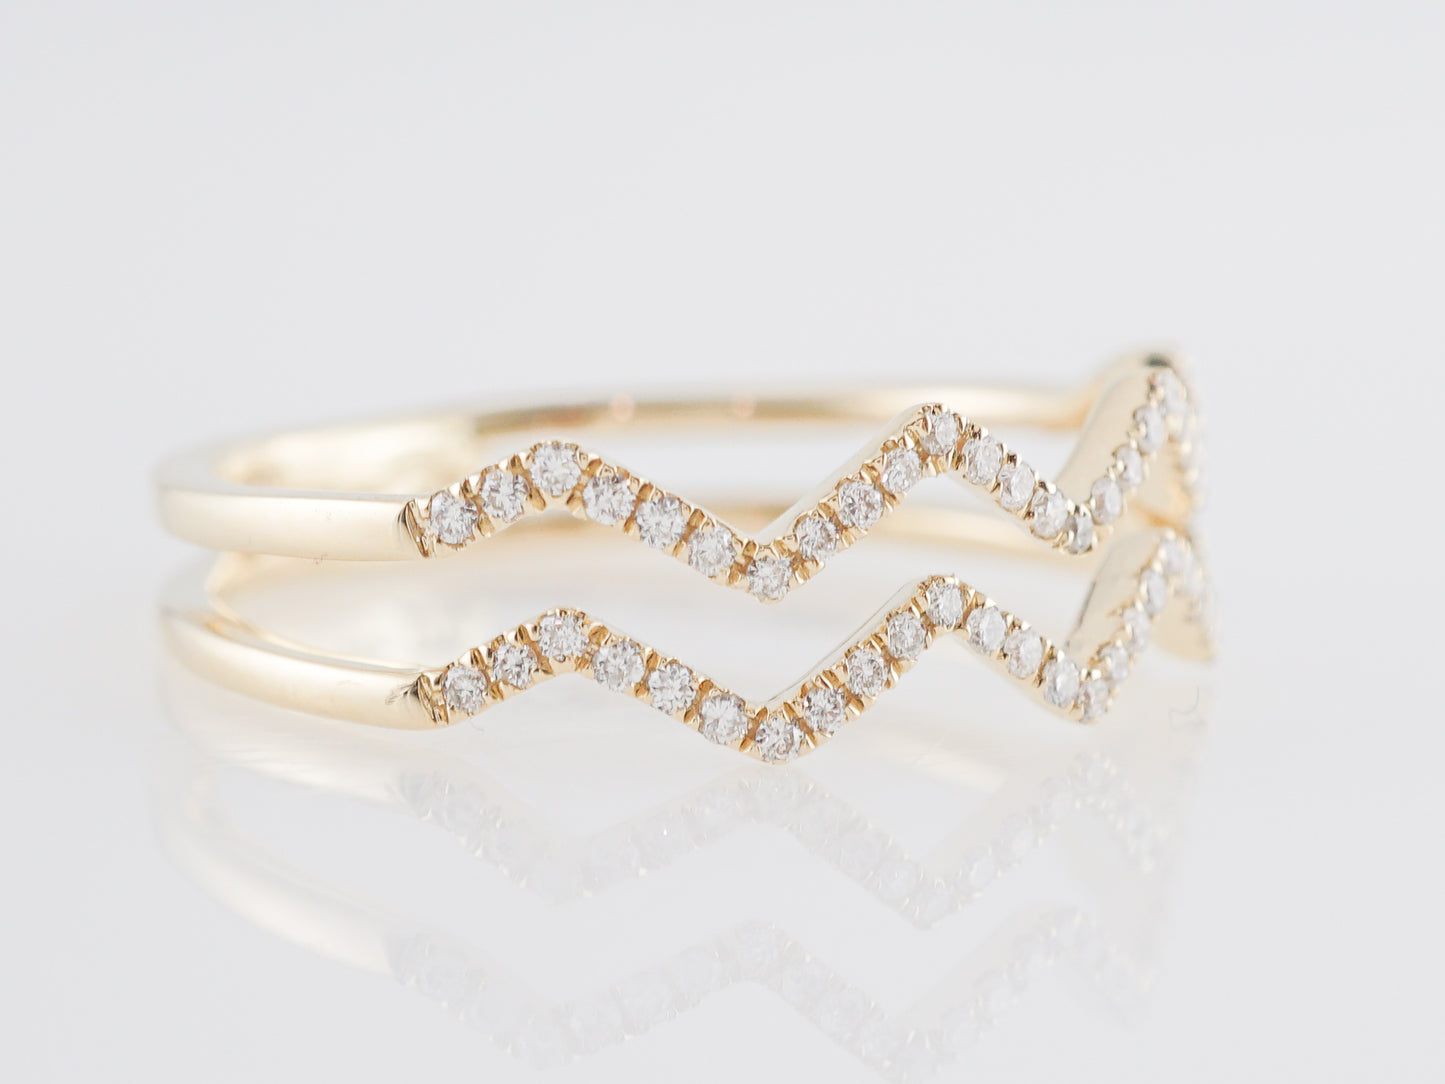 .18 Diamond Stacked Wedding Band in 14k Yellow Gold